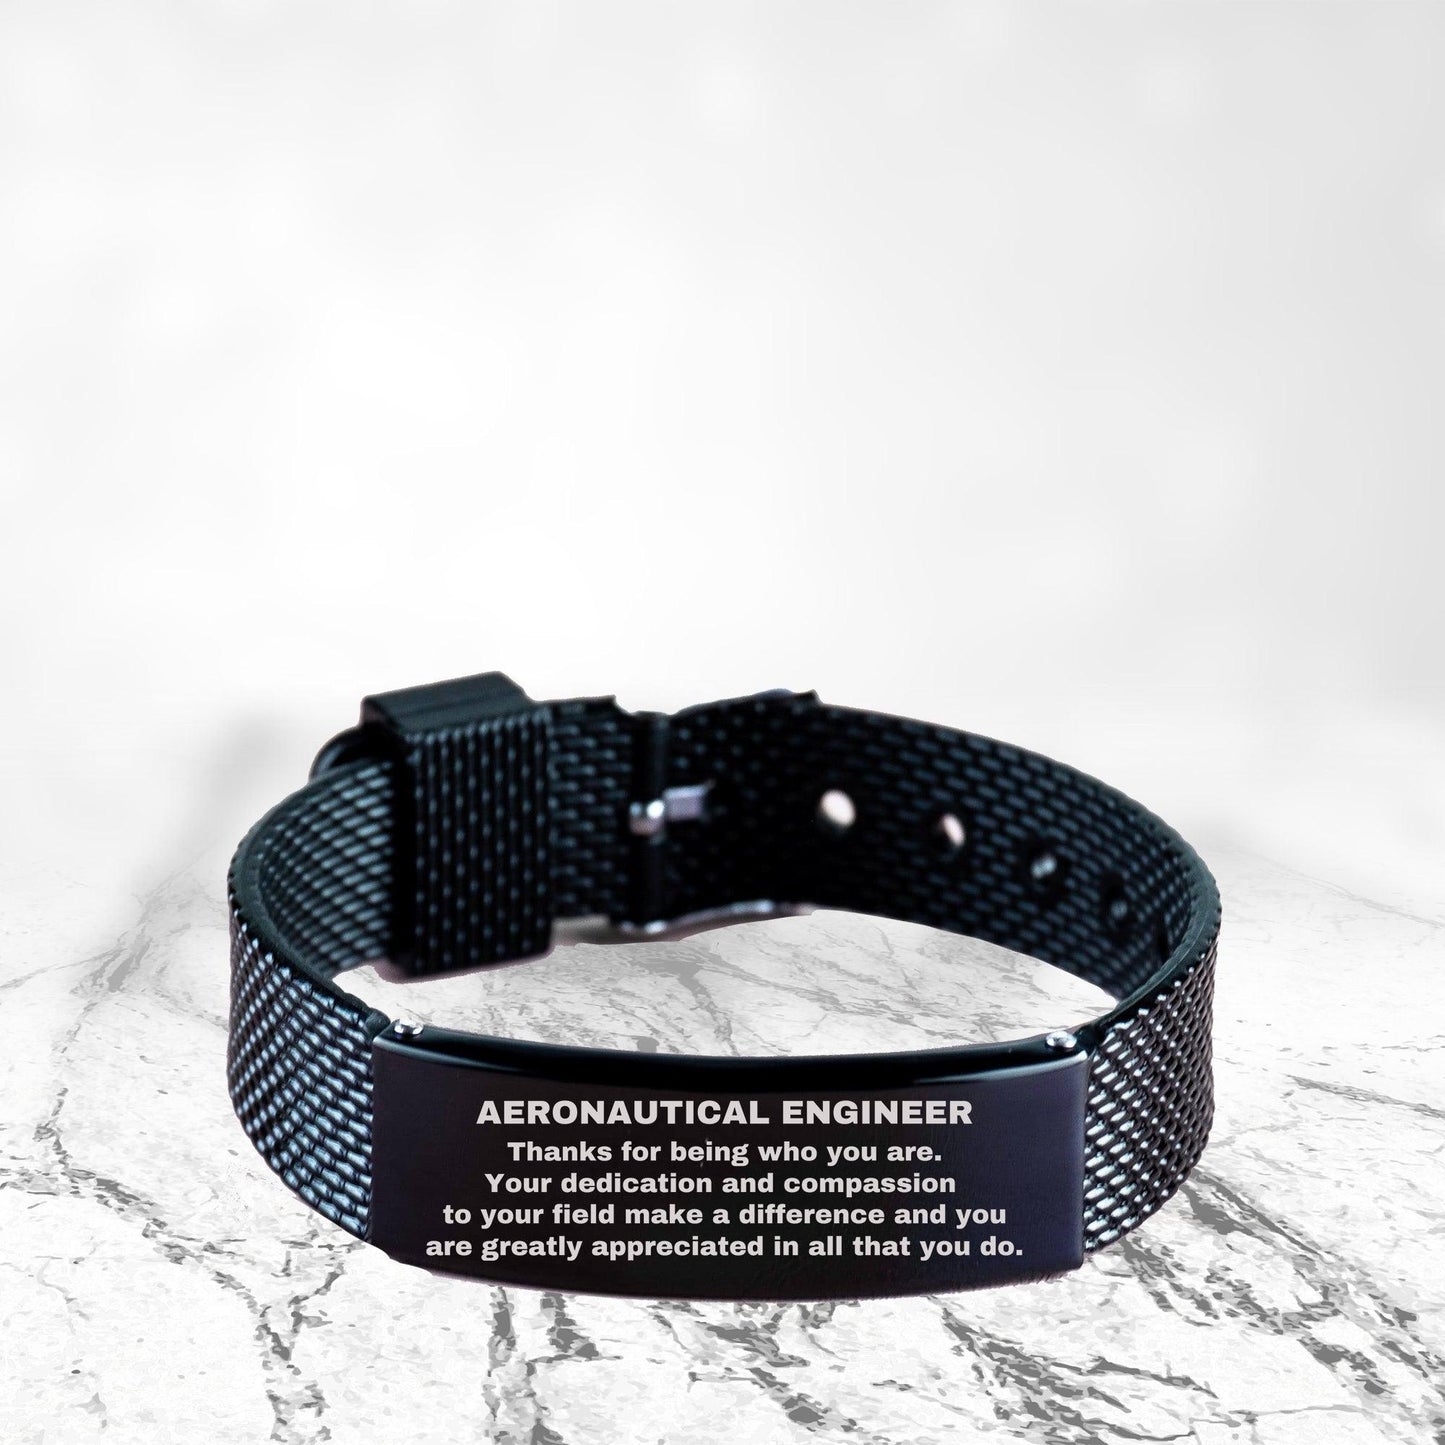 Aeronautical Engineer Black Shark Mesh Stainless Steel Engraved Bracelet - Thanks for being who you are - Birthday Christmas Jewelry Gifts Coworkers Colleague Boss - Mallard Moon Gift Shop